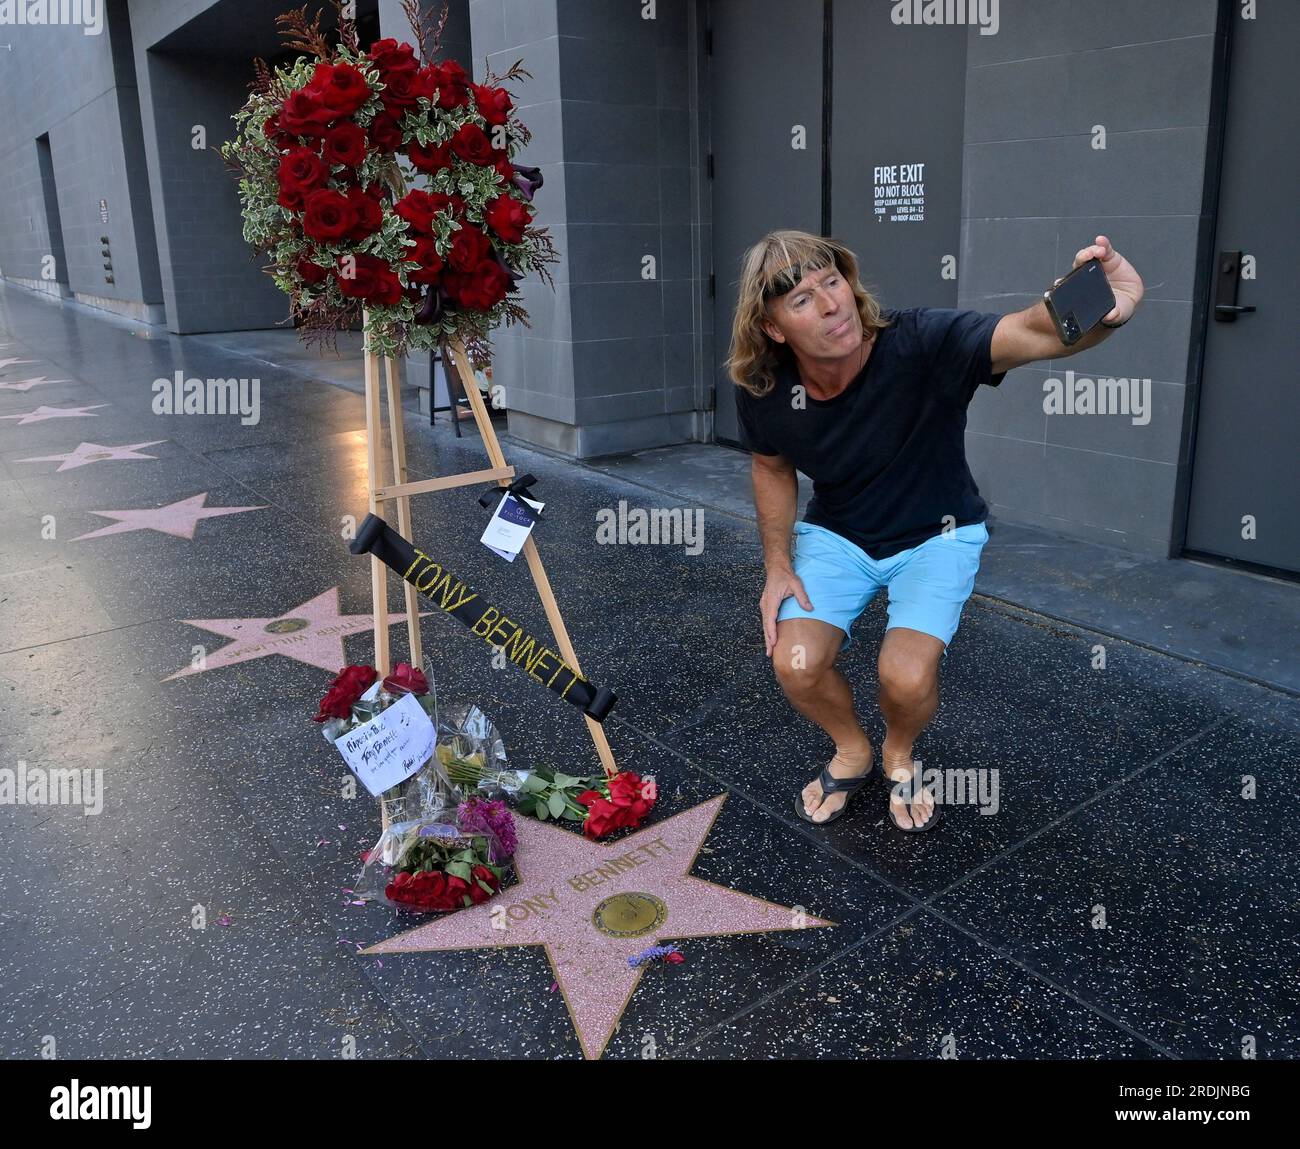 Los Angeles, United States. 21st July, 2023. A fan takes a selfie at singer Tony Bennett's star on Vine Street in the Hollywood section of Los Angeles on Friday, July 21, 2023. Bennett, who released more than 70 albums over a music career that spanned decades, died in his hometown of New York at age 96. Bennett, who earned the admiration of generations of performers from Frank Sinatra to Lady Gaga and Amy Winehouse was a true citizen of the world, an interpreter of the Great American Songbook for fans around the globe. Photo by Jim Ruymen/UPI Credit: UPI/Alamy Live News Stock Photo